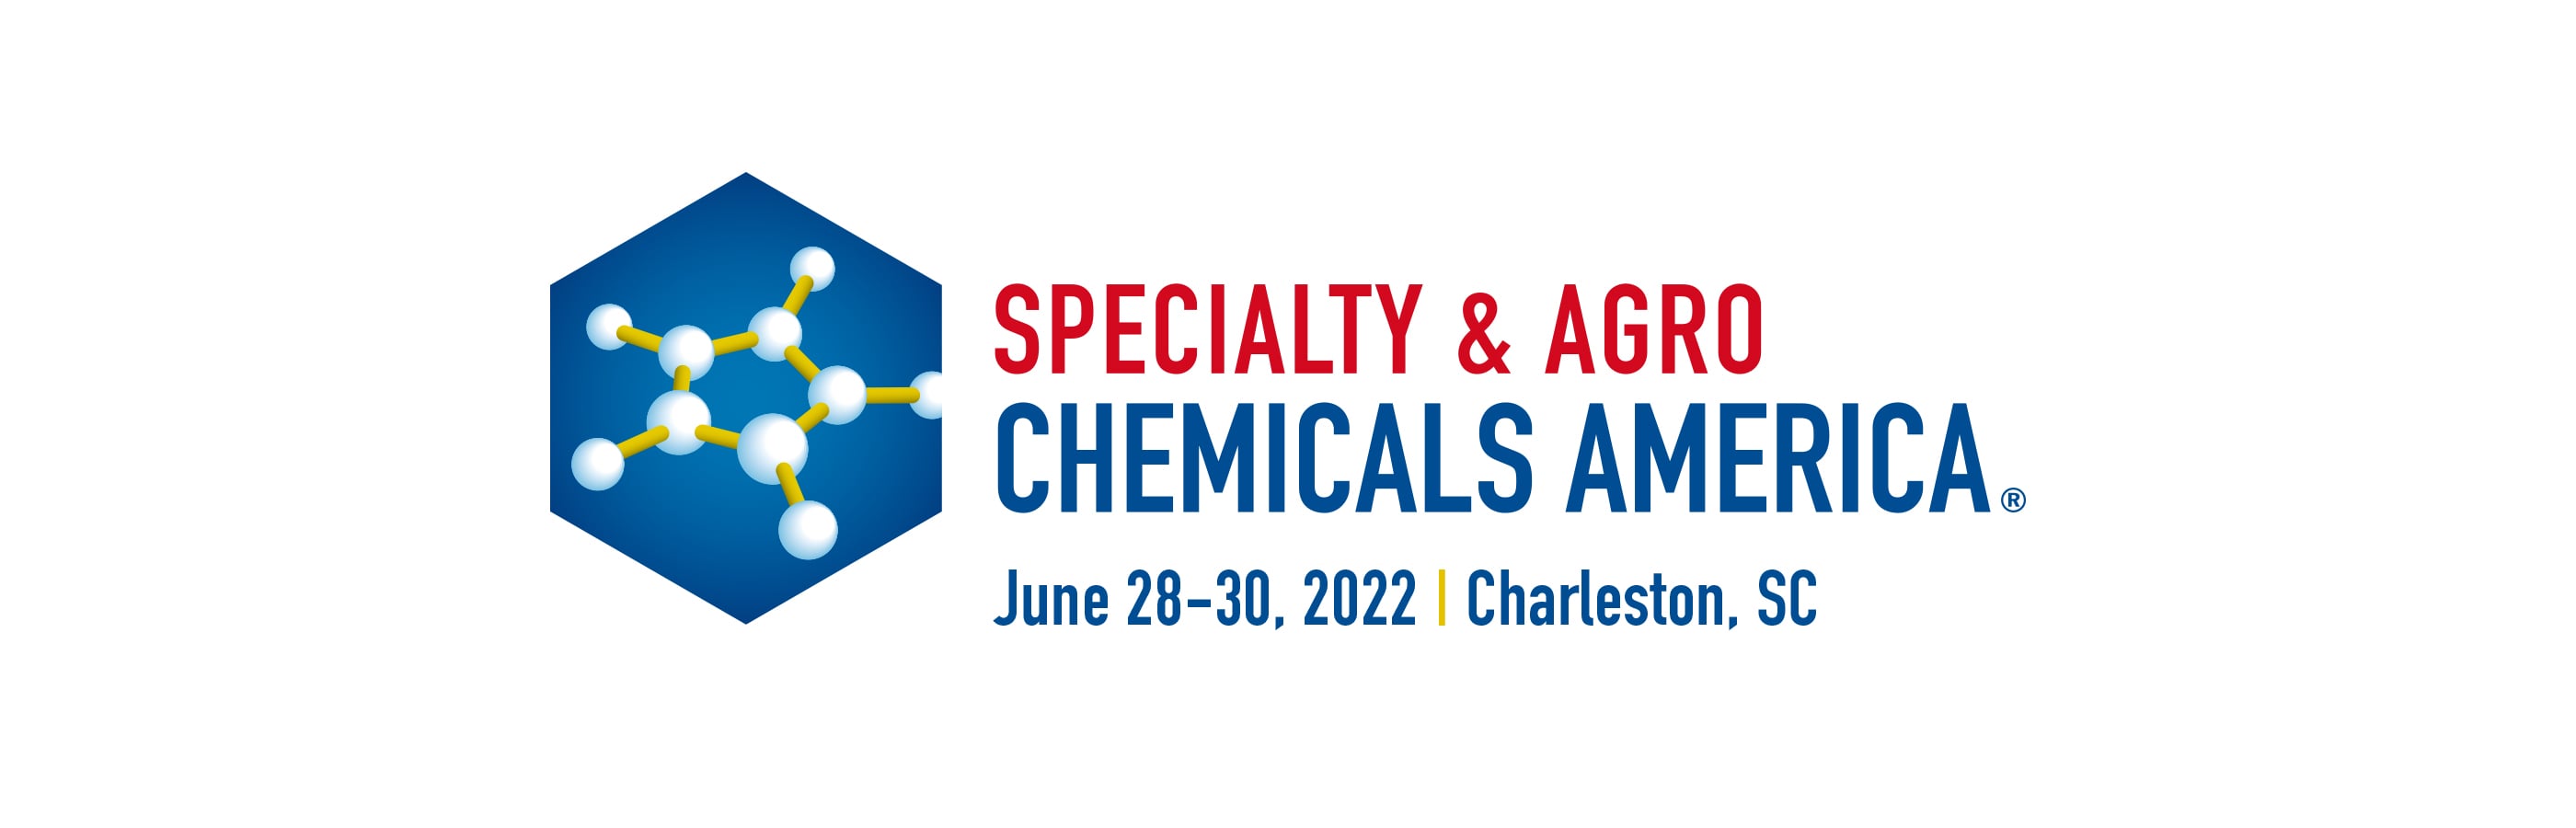 Speciality & Agro Chemicals America 2022